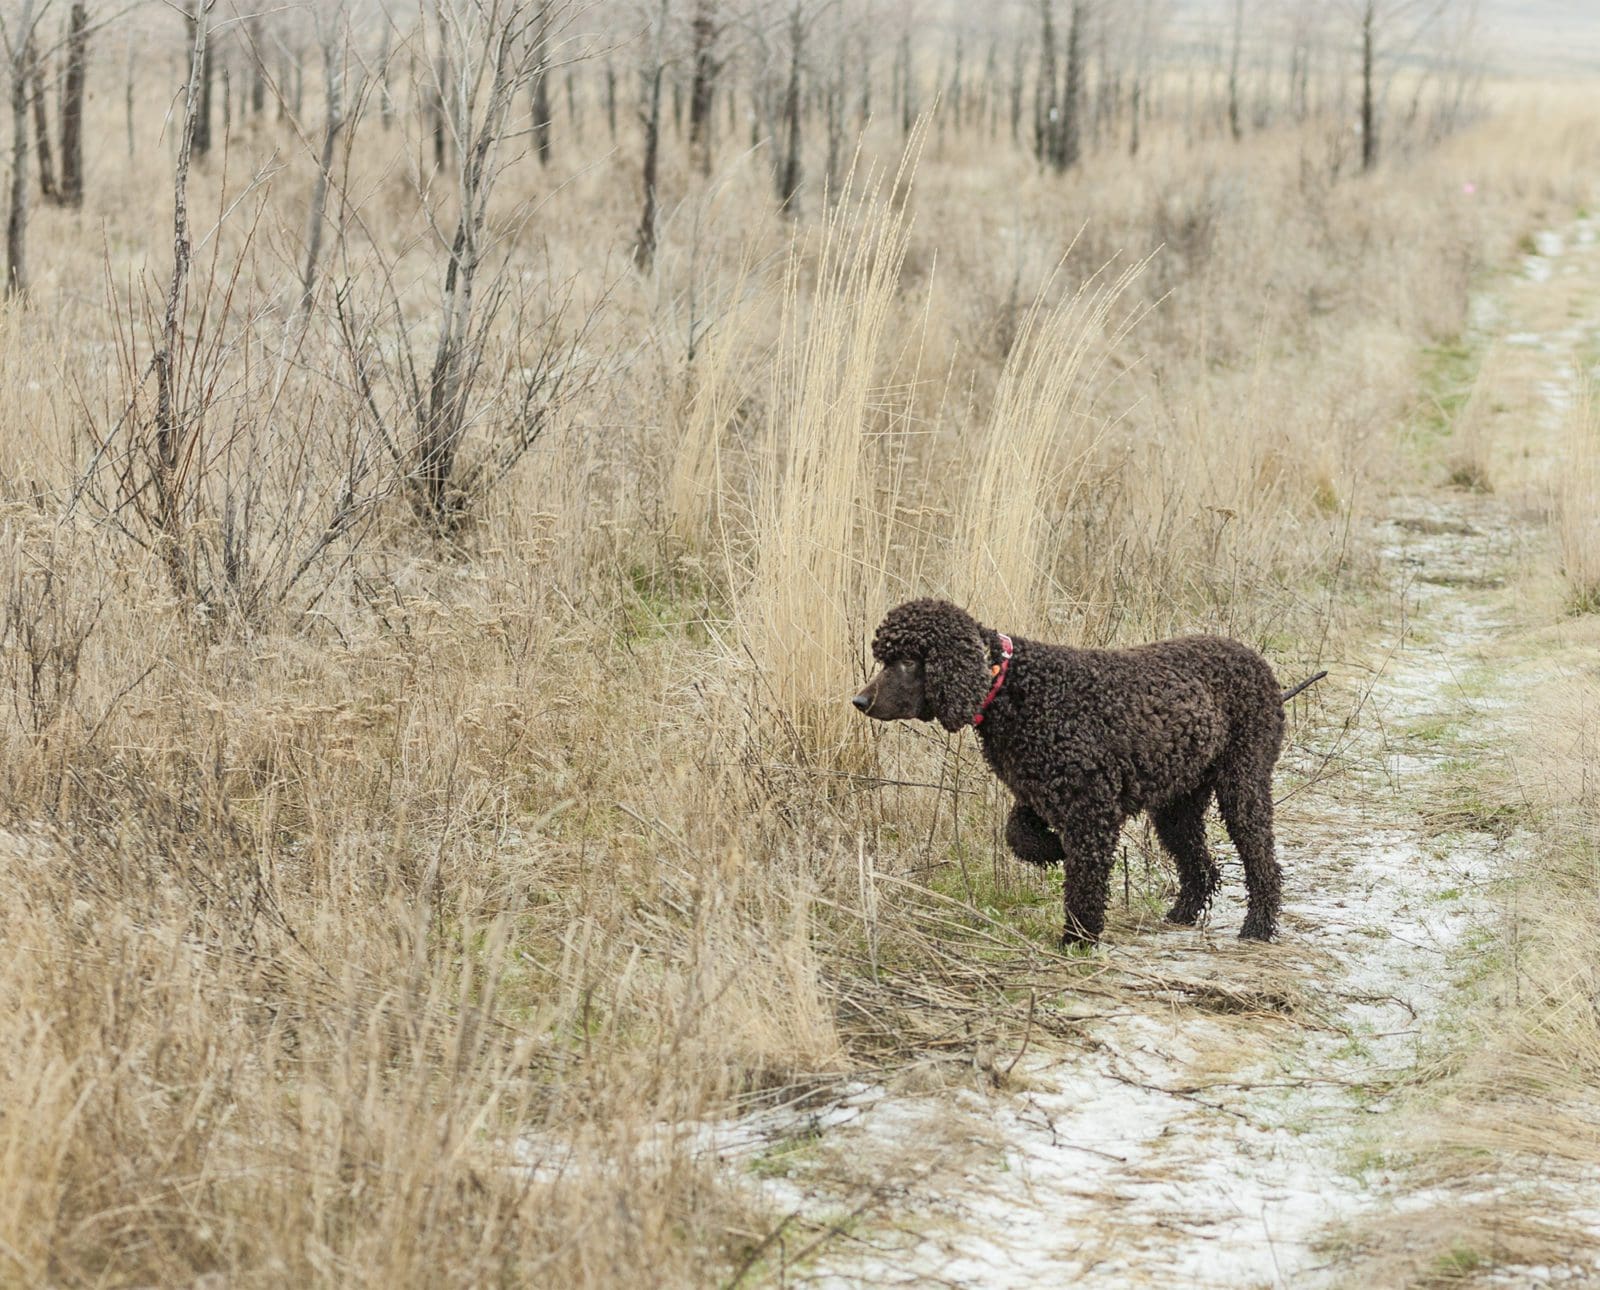 An Irish Water Spaniel points at cover.